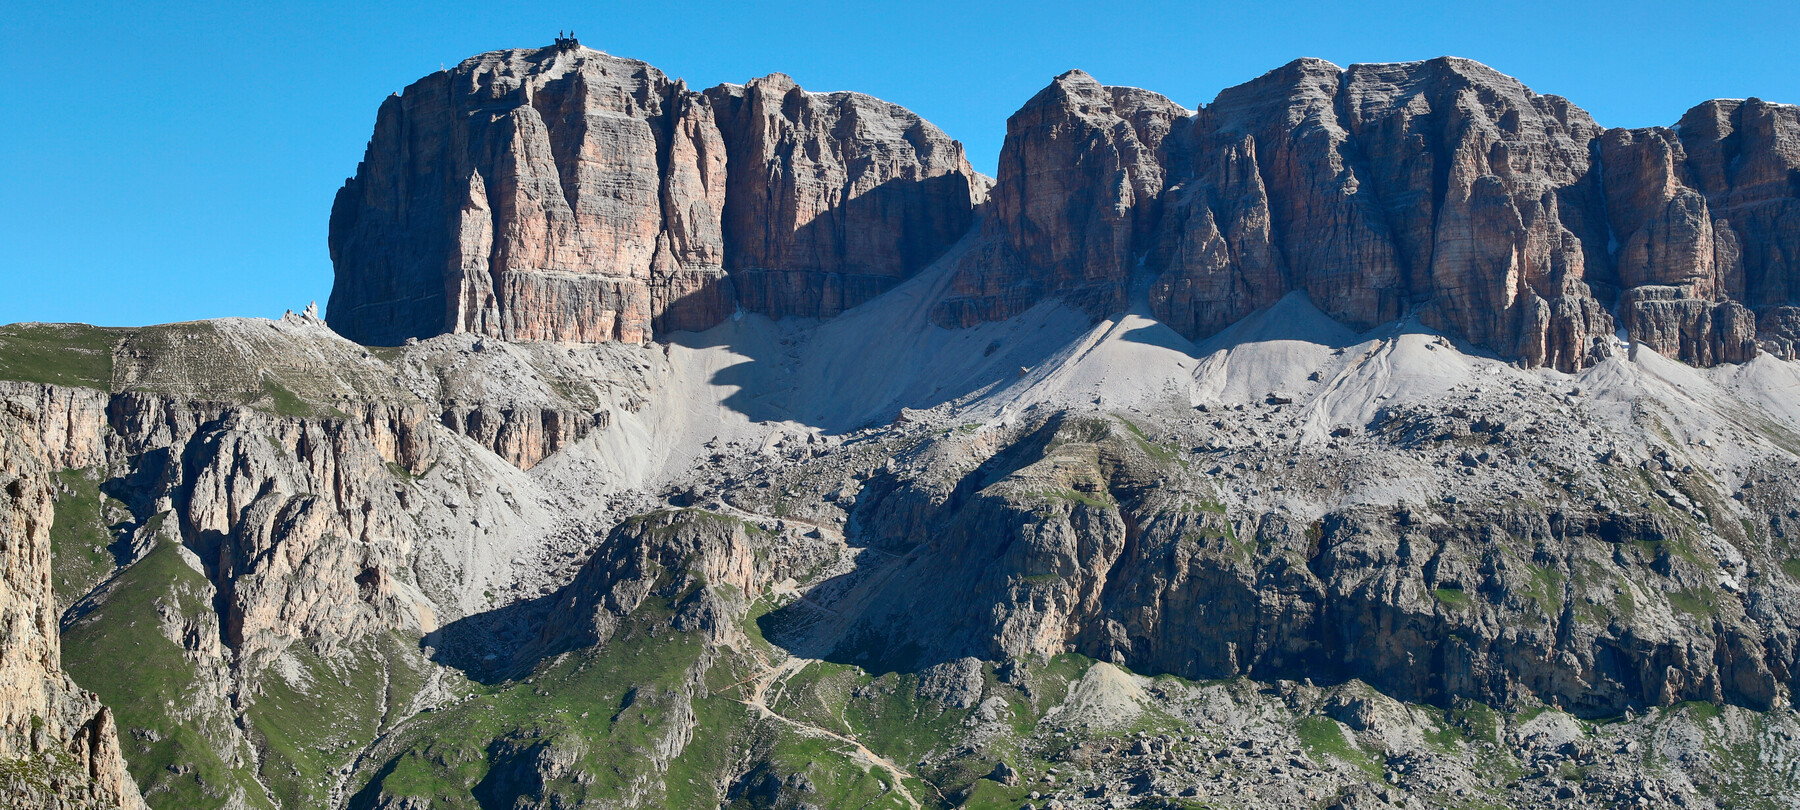 The Dolomites, a precious site for science and nature: the laboratory on Passo Fedaia